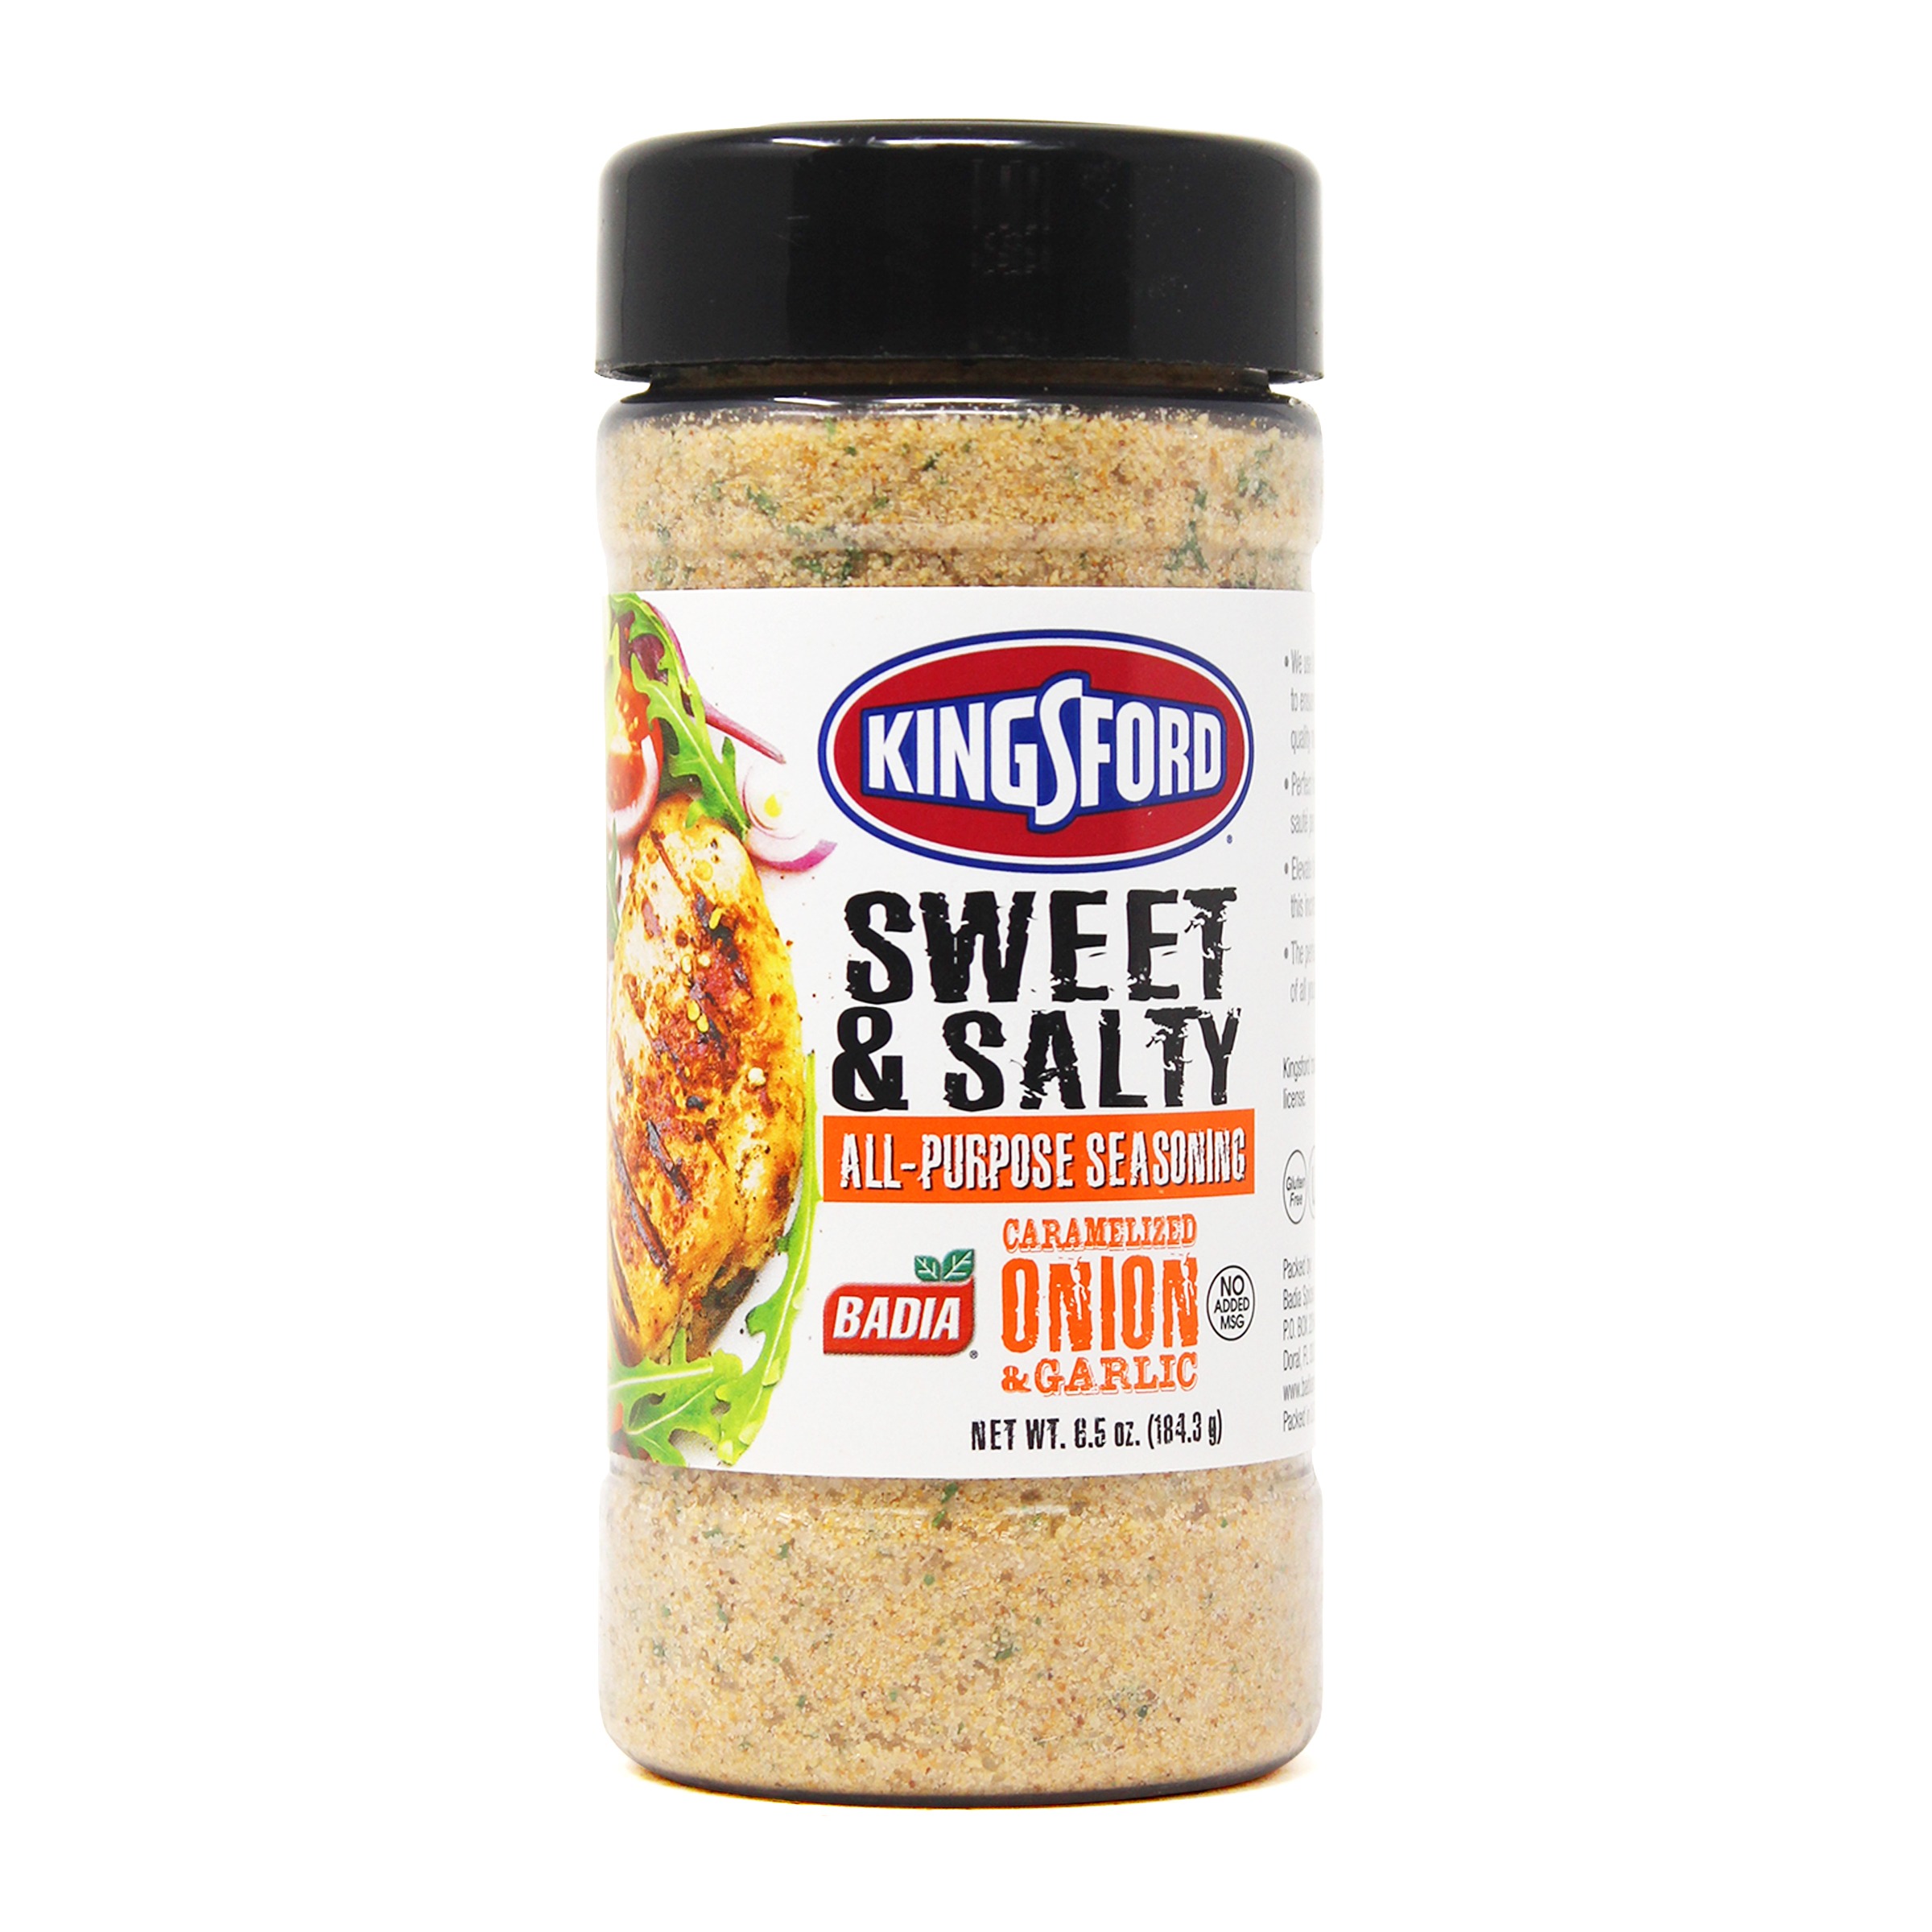 Fire & Smoke Society The Usual All-Purpose Seasoning Spice Blend, 5.6 Ounce